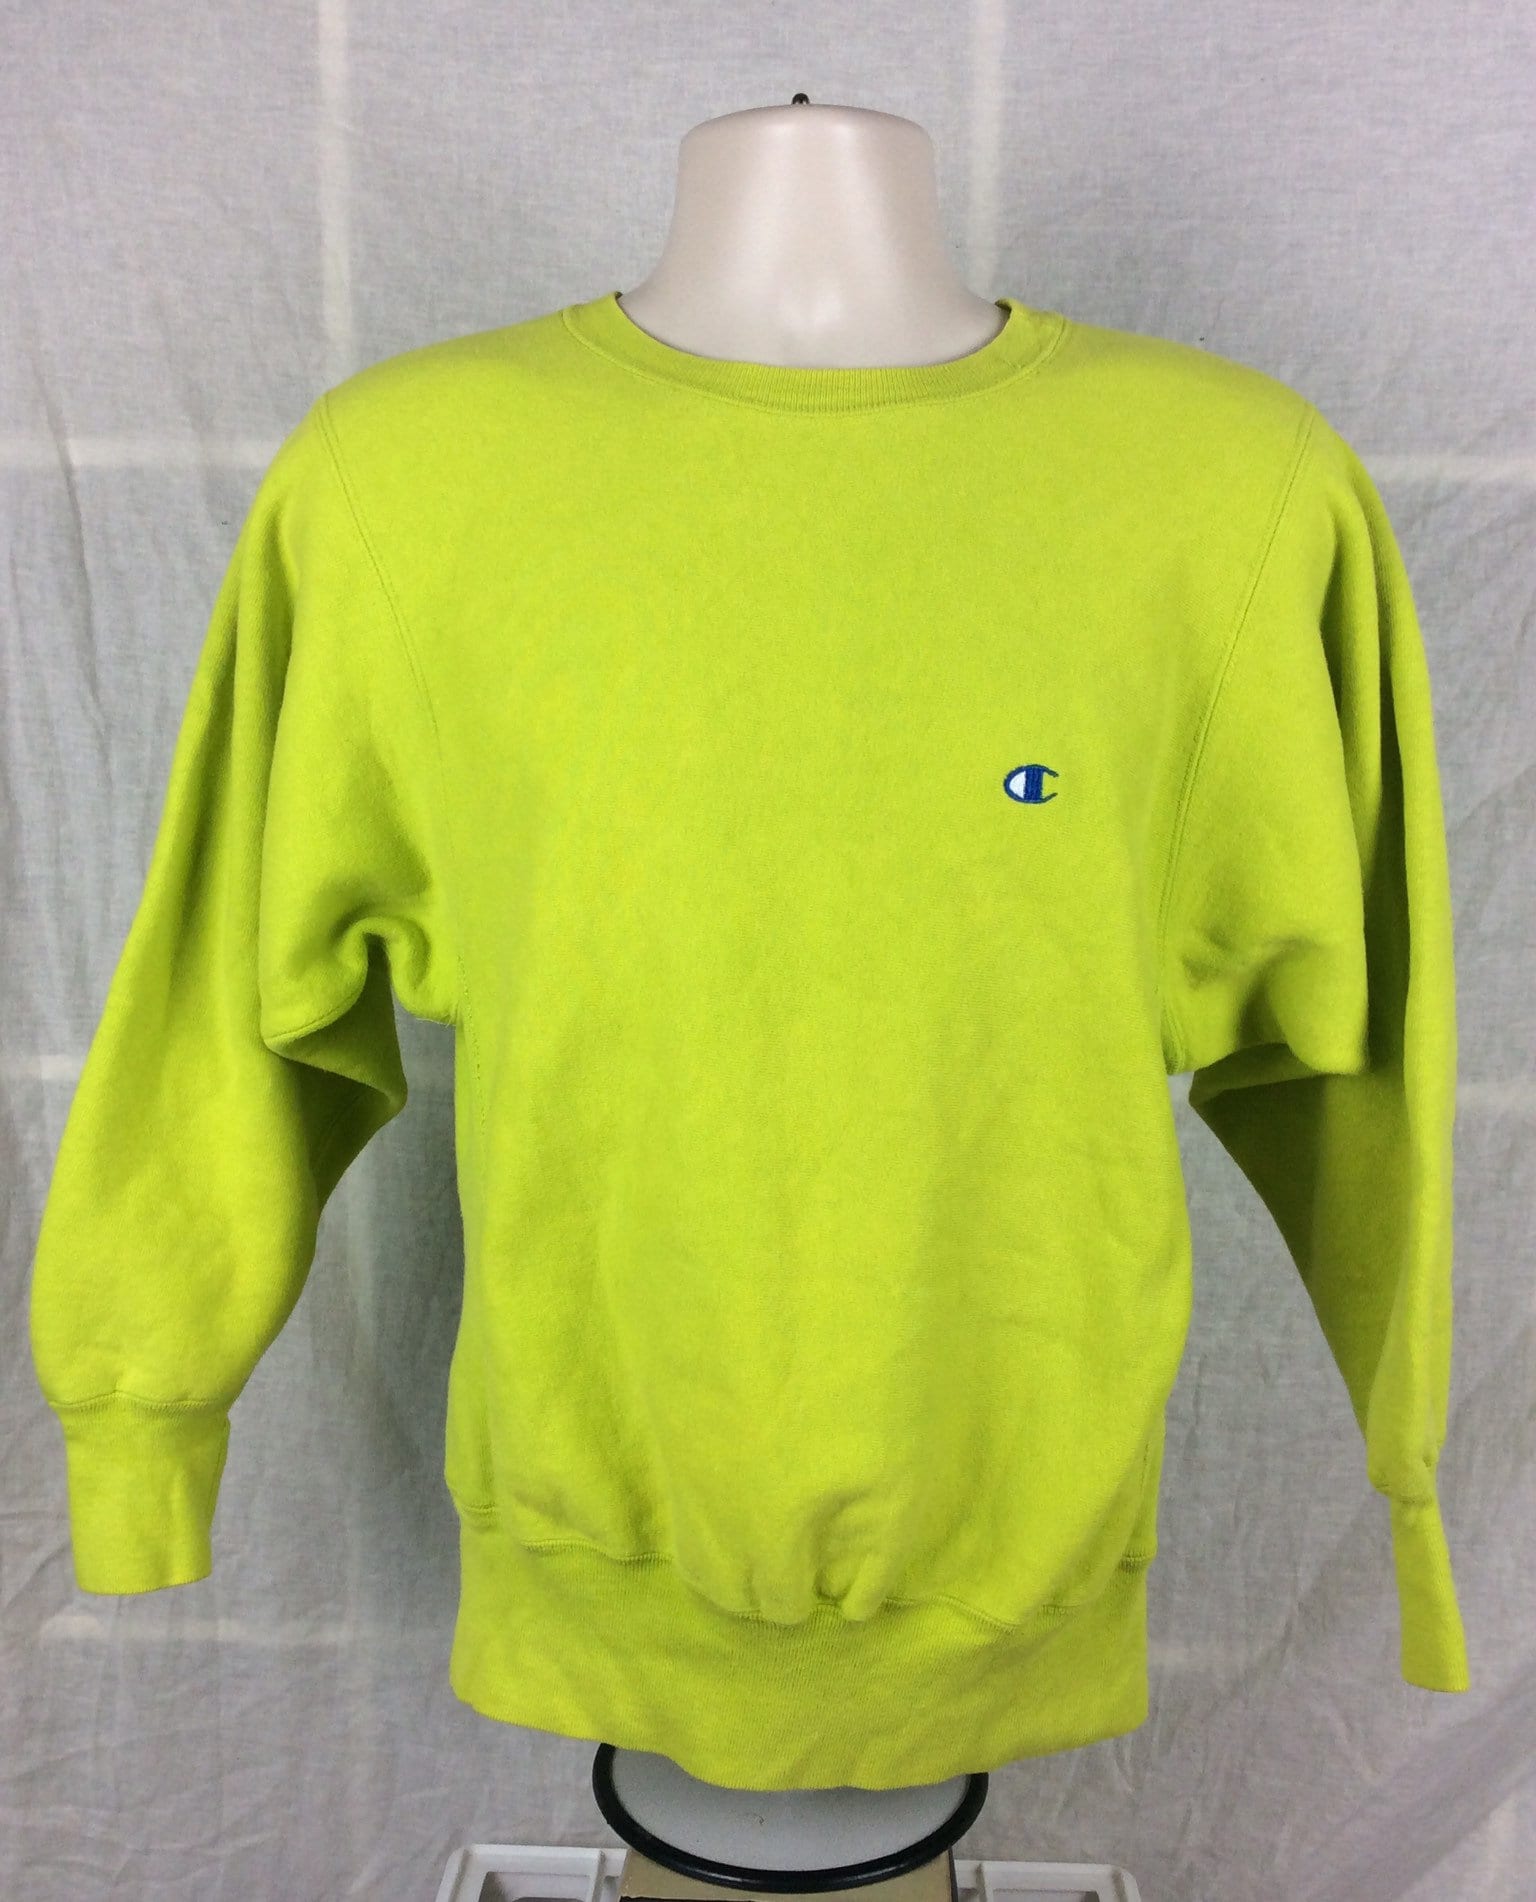 Vintage 90s Champion Reverse Weave Chartreuse Yellow Green